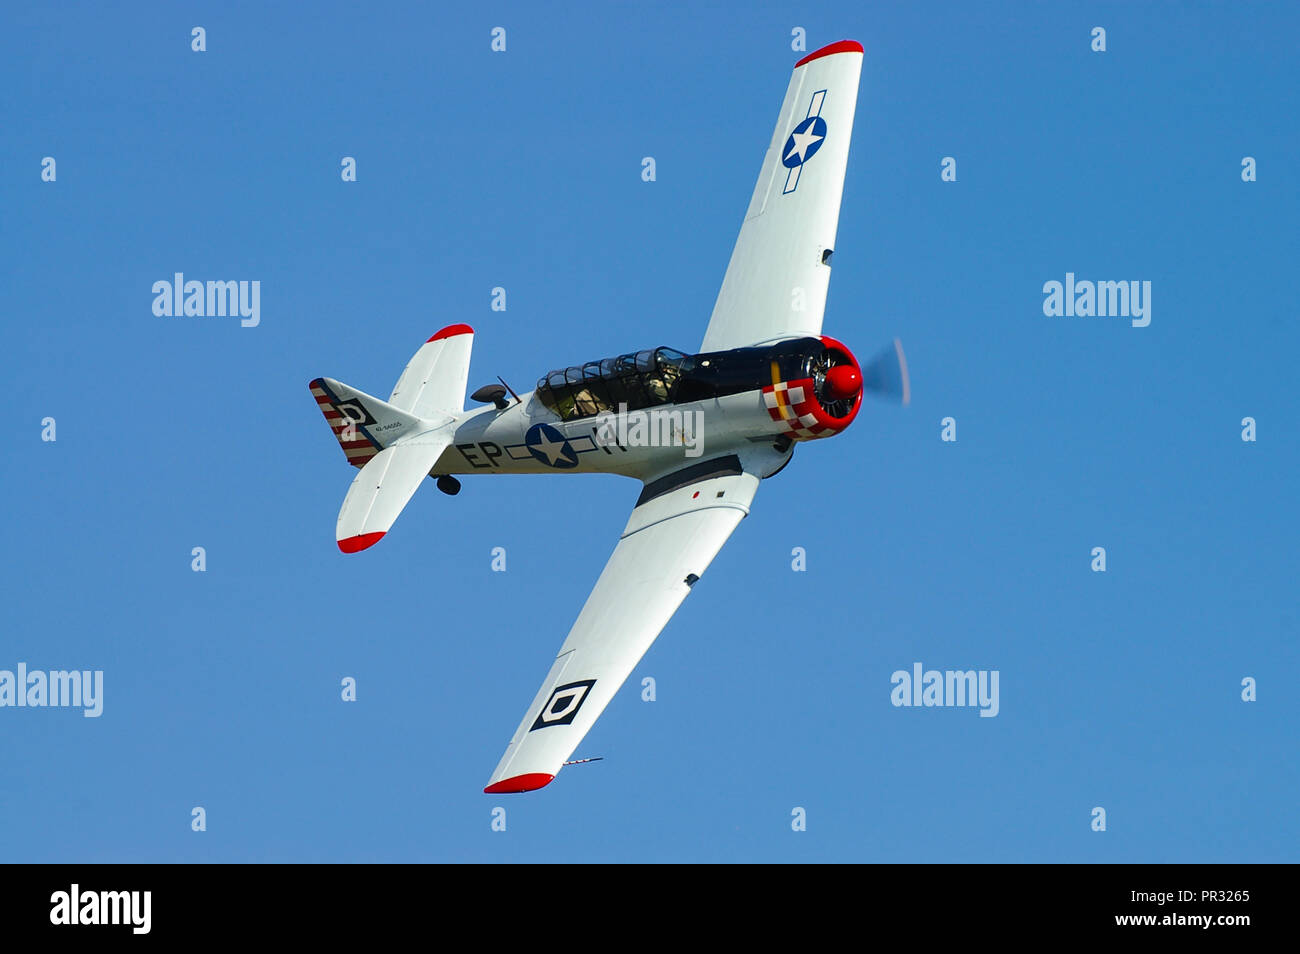 North American T-6 Harvard, Texan, owned by Maurice Hammond flying in blue sky at an airshow Stock Photo